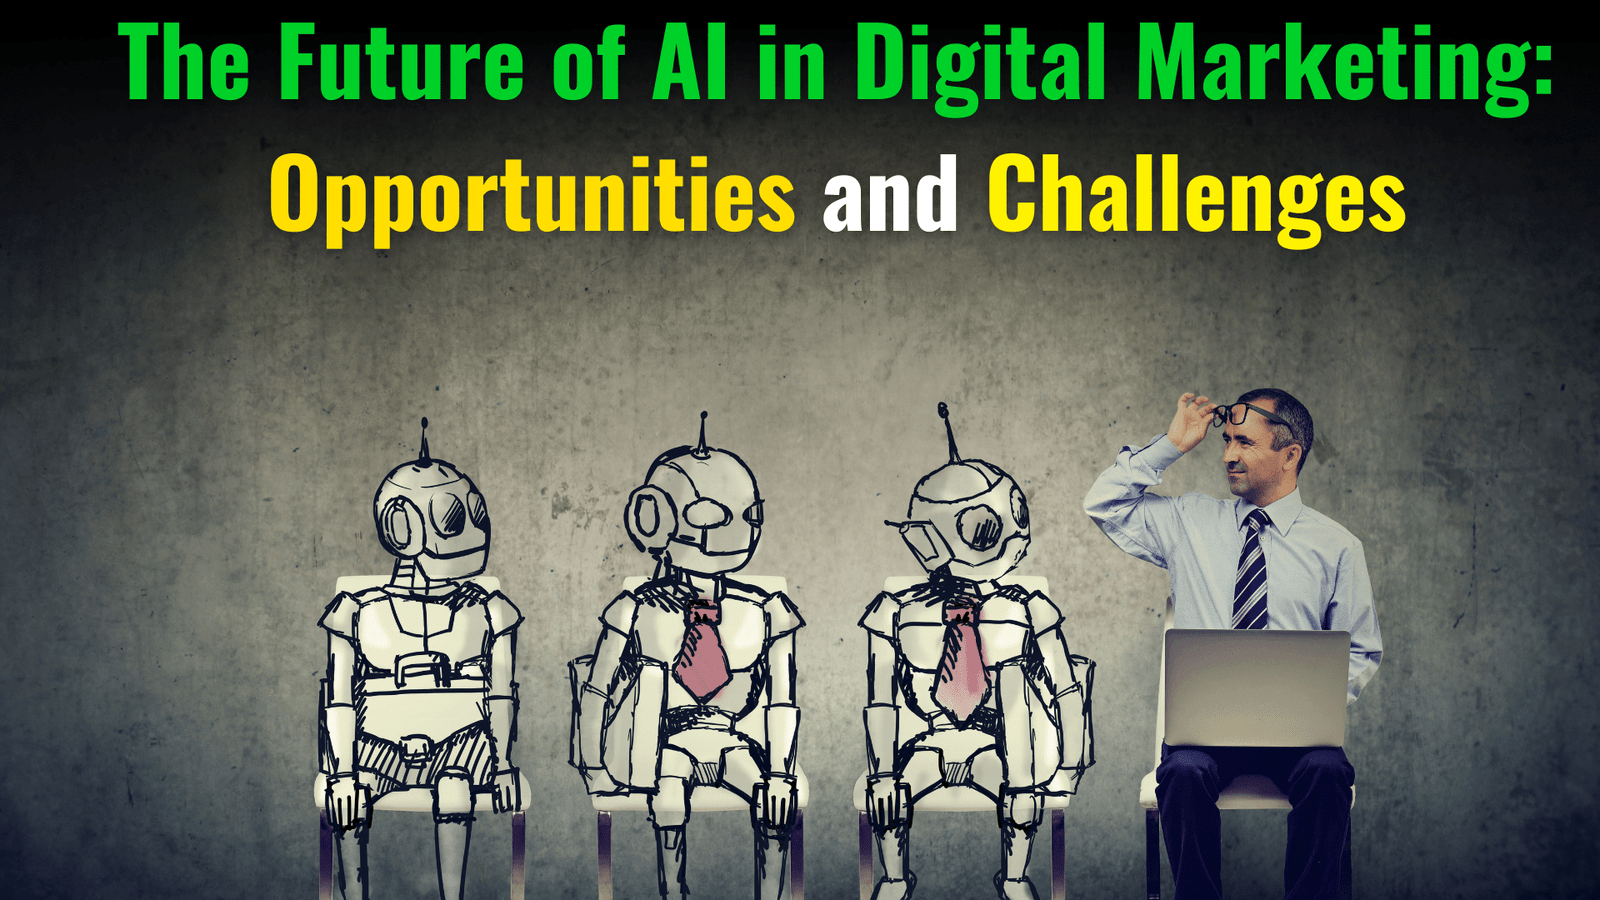 The Future of AI in Digital Marketing Opportunities and Challenges